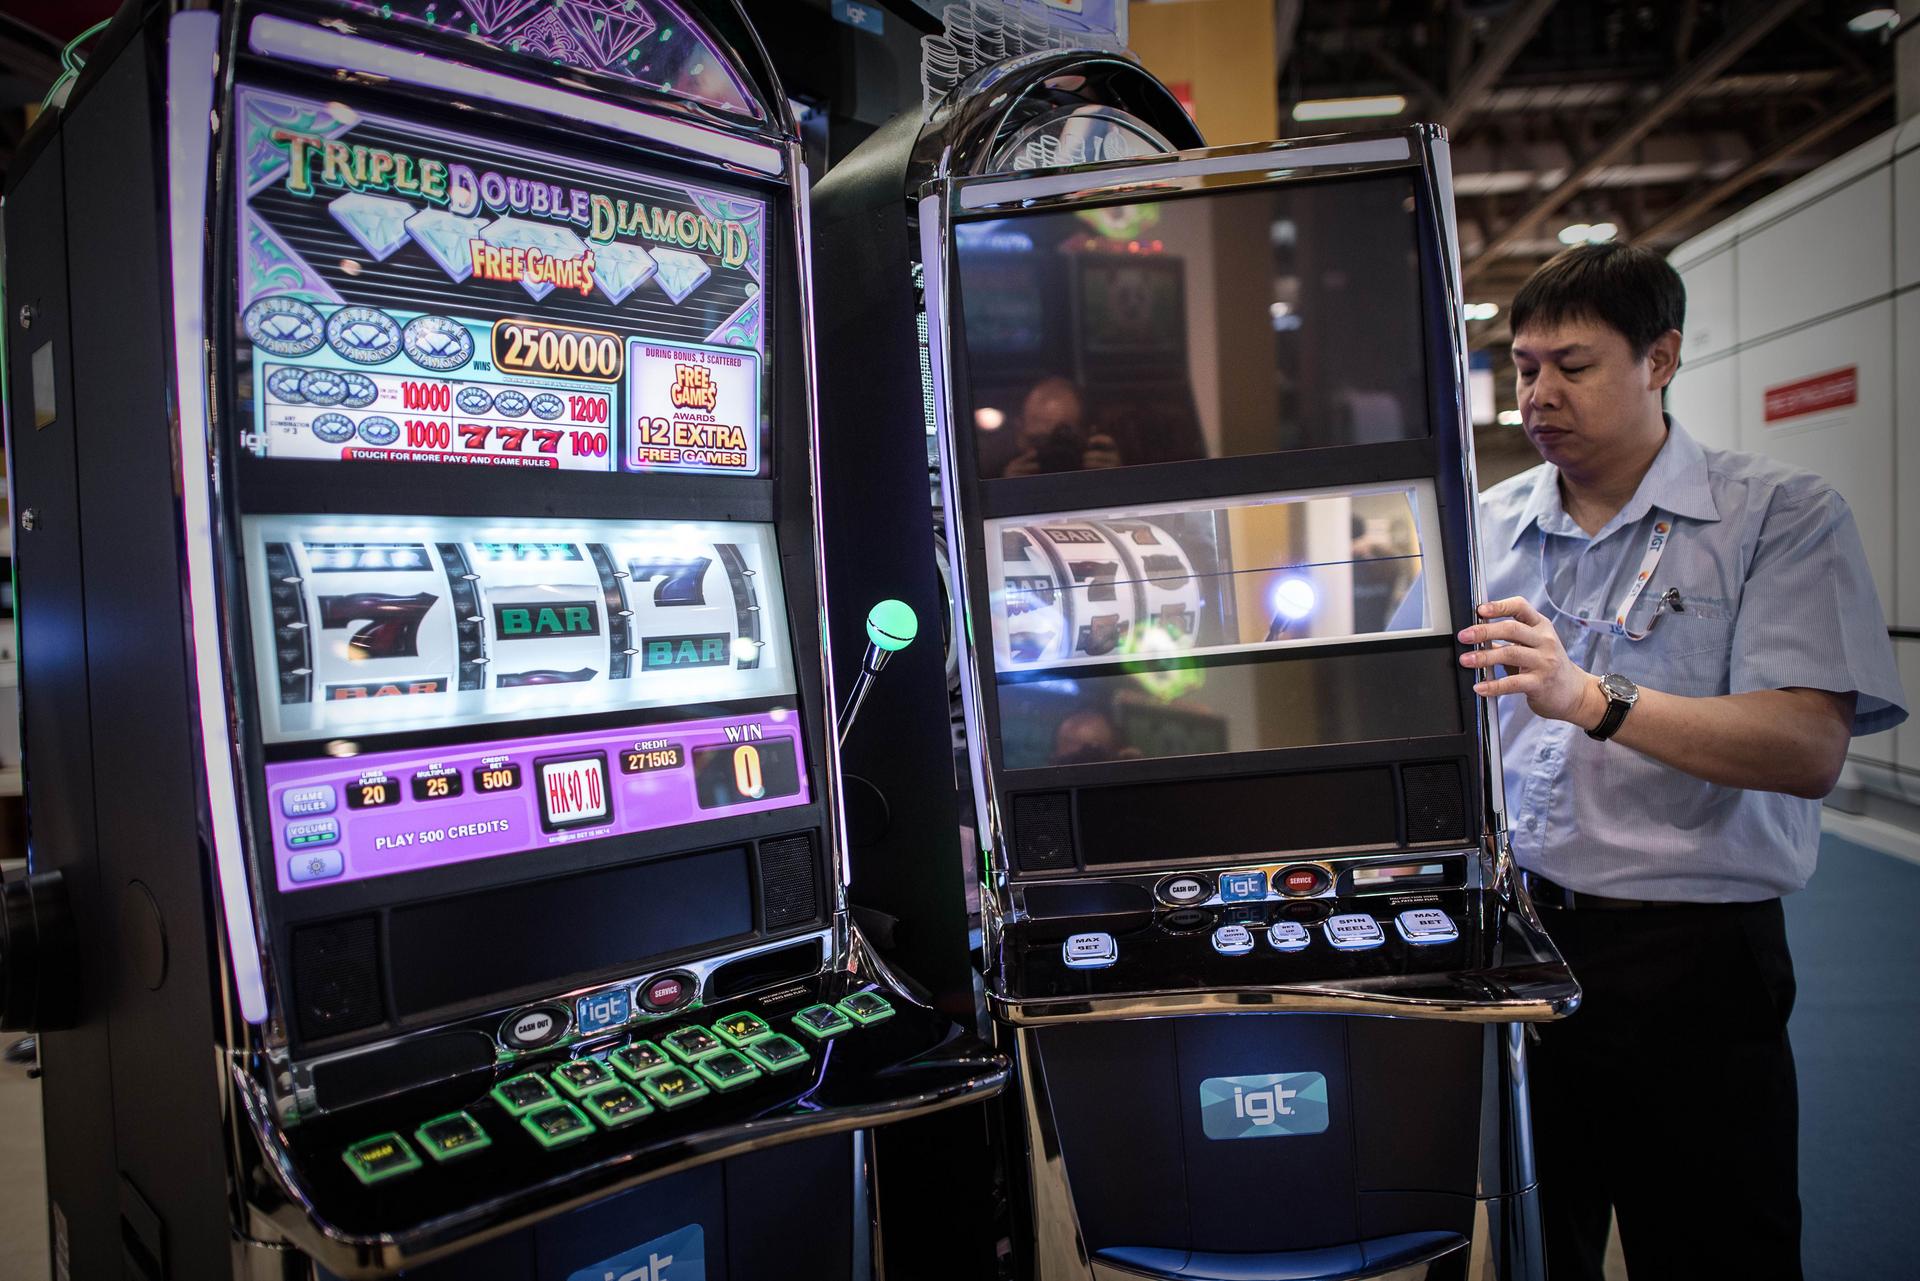 A technician checks slot machines at The Venetian in Macau. The machines have become dominant in casinos over the years. Photo: AFP